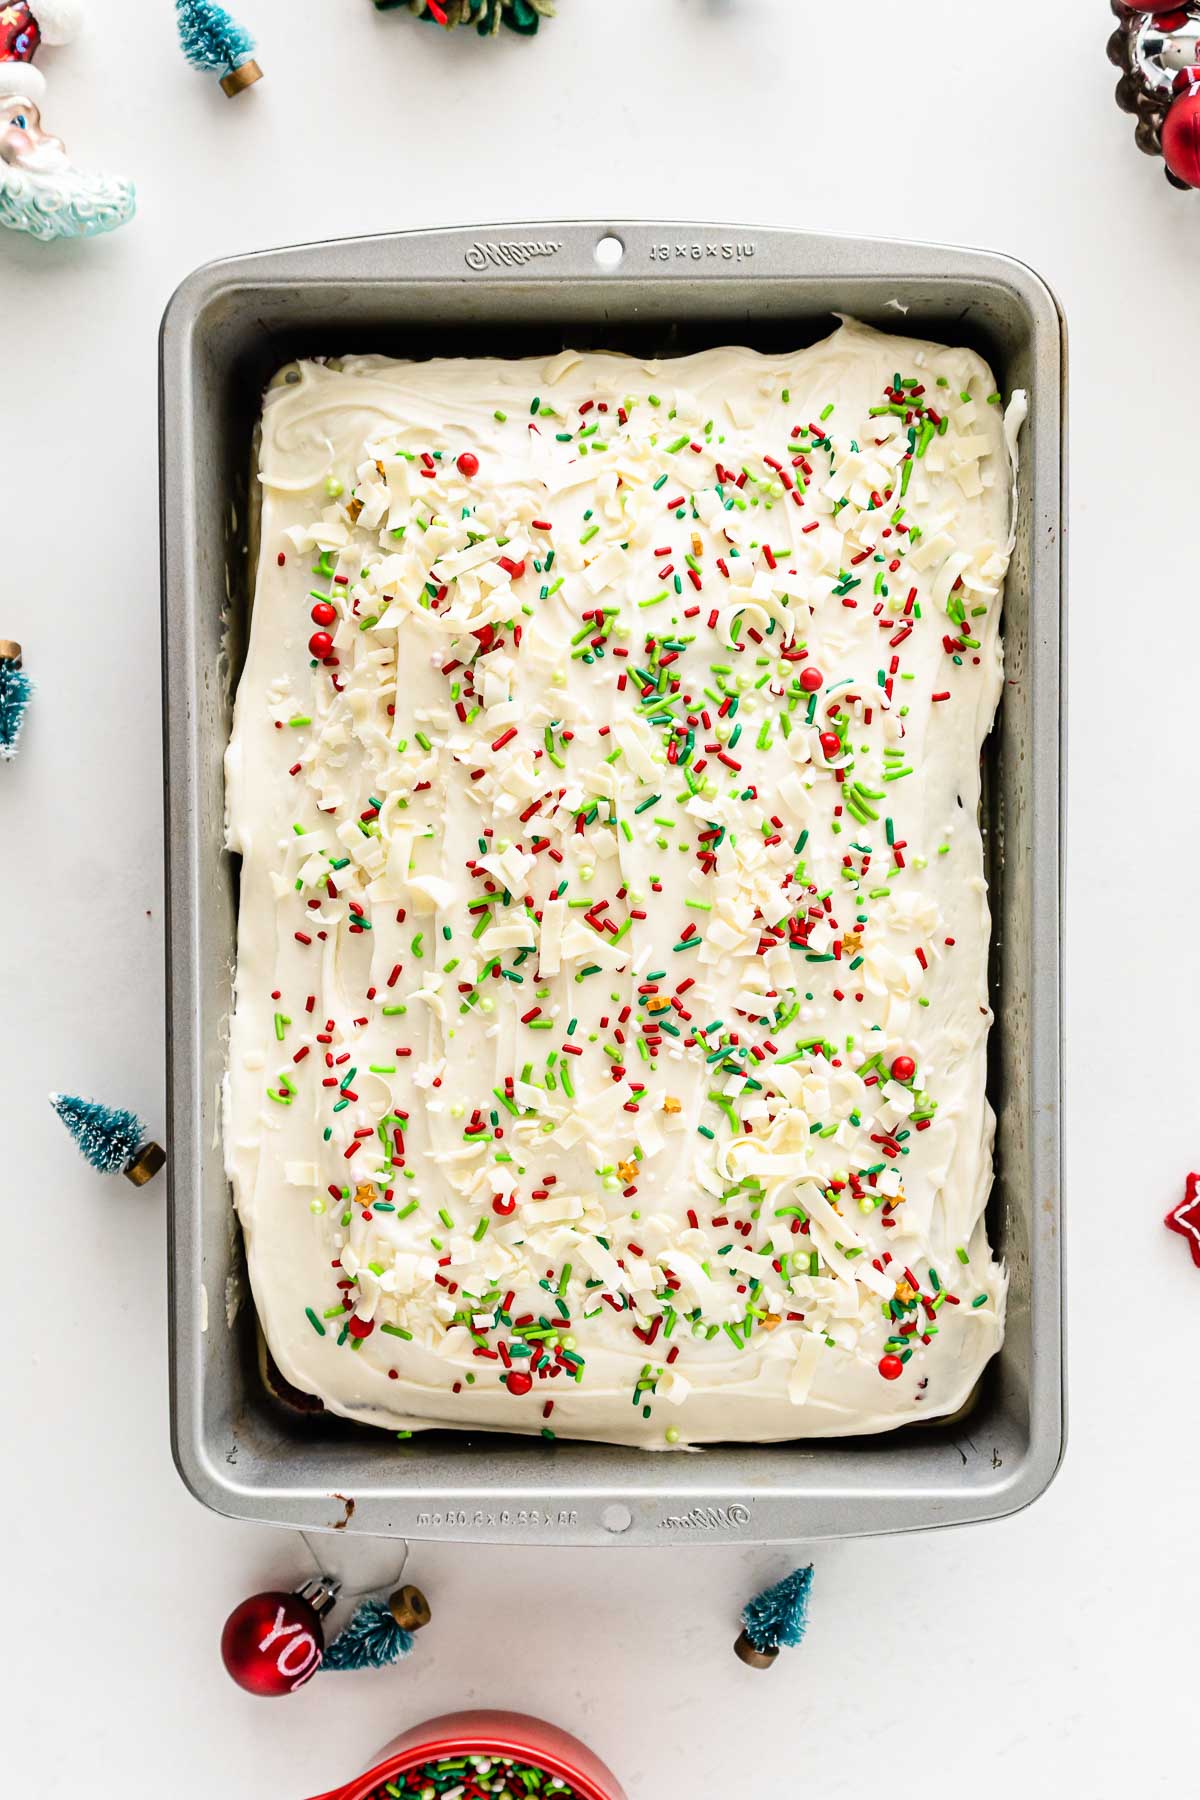 rectangle baking pan with a cake topped with cream cheese frosting with Christmas sprinkles